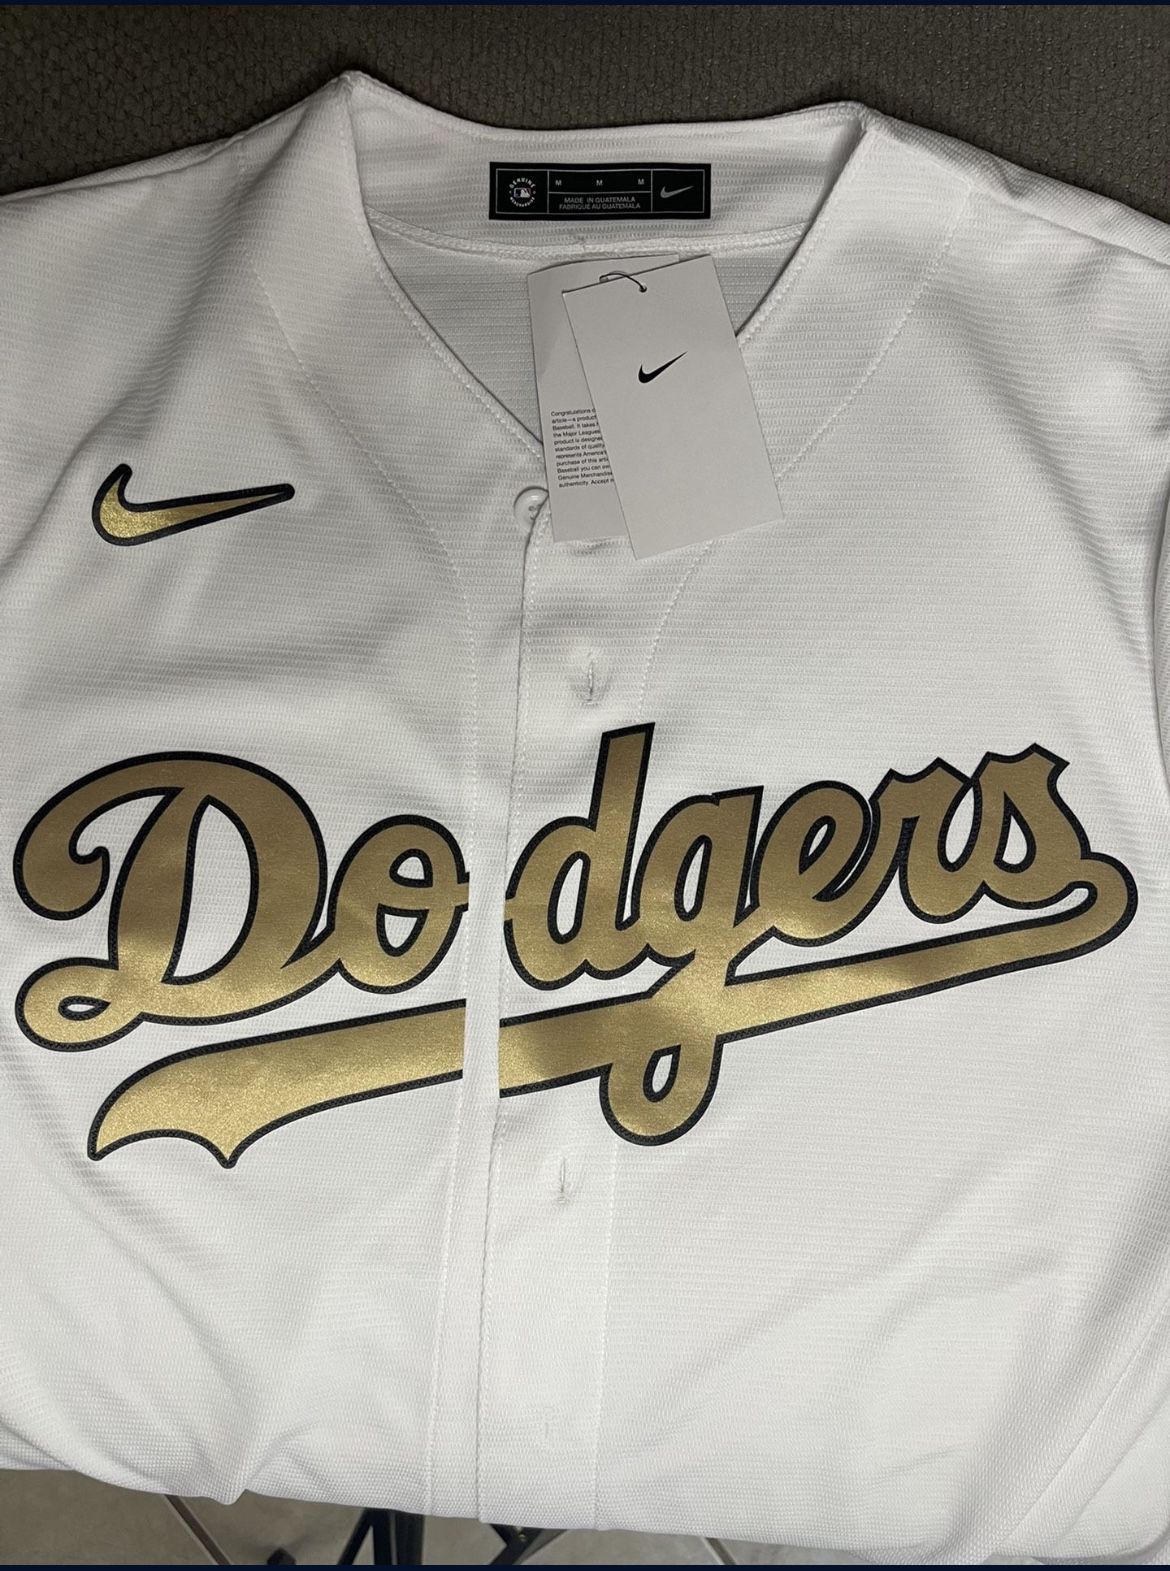 Dodger All-Stars To Receive Official Jerseys – NBC Los Angeles